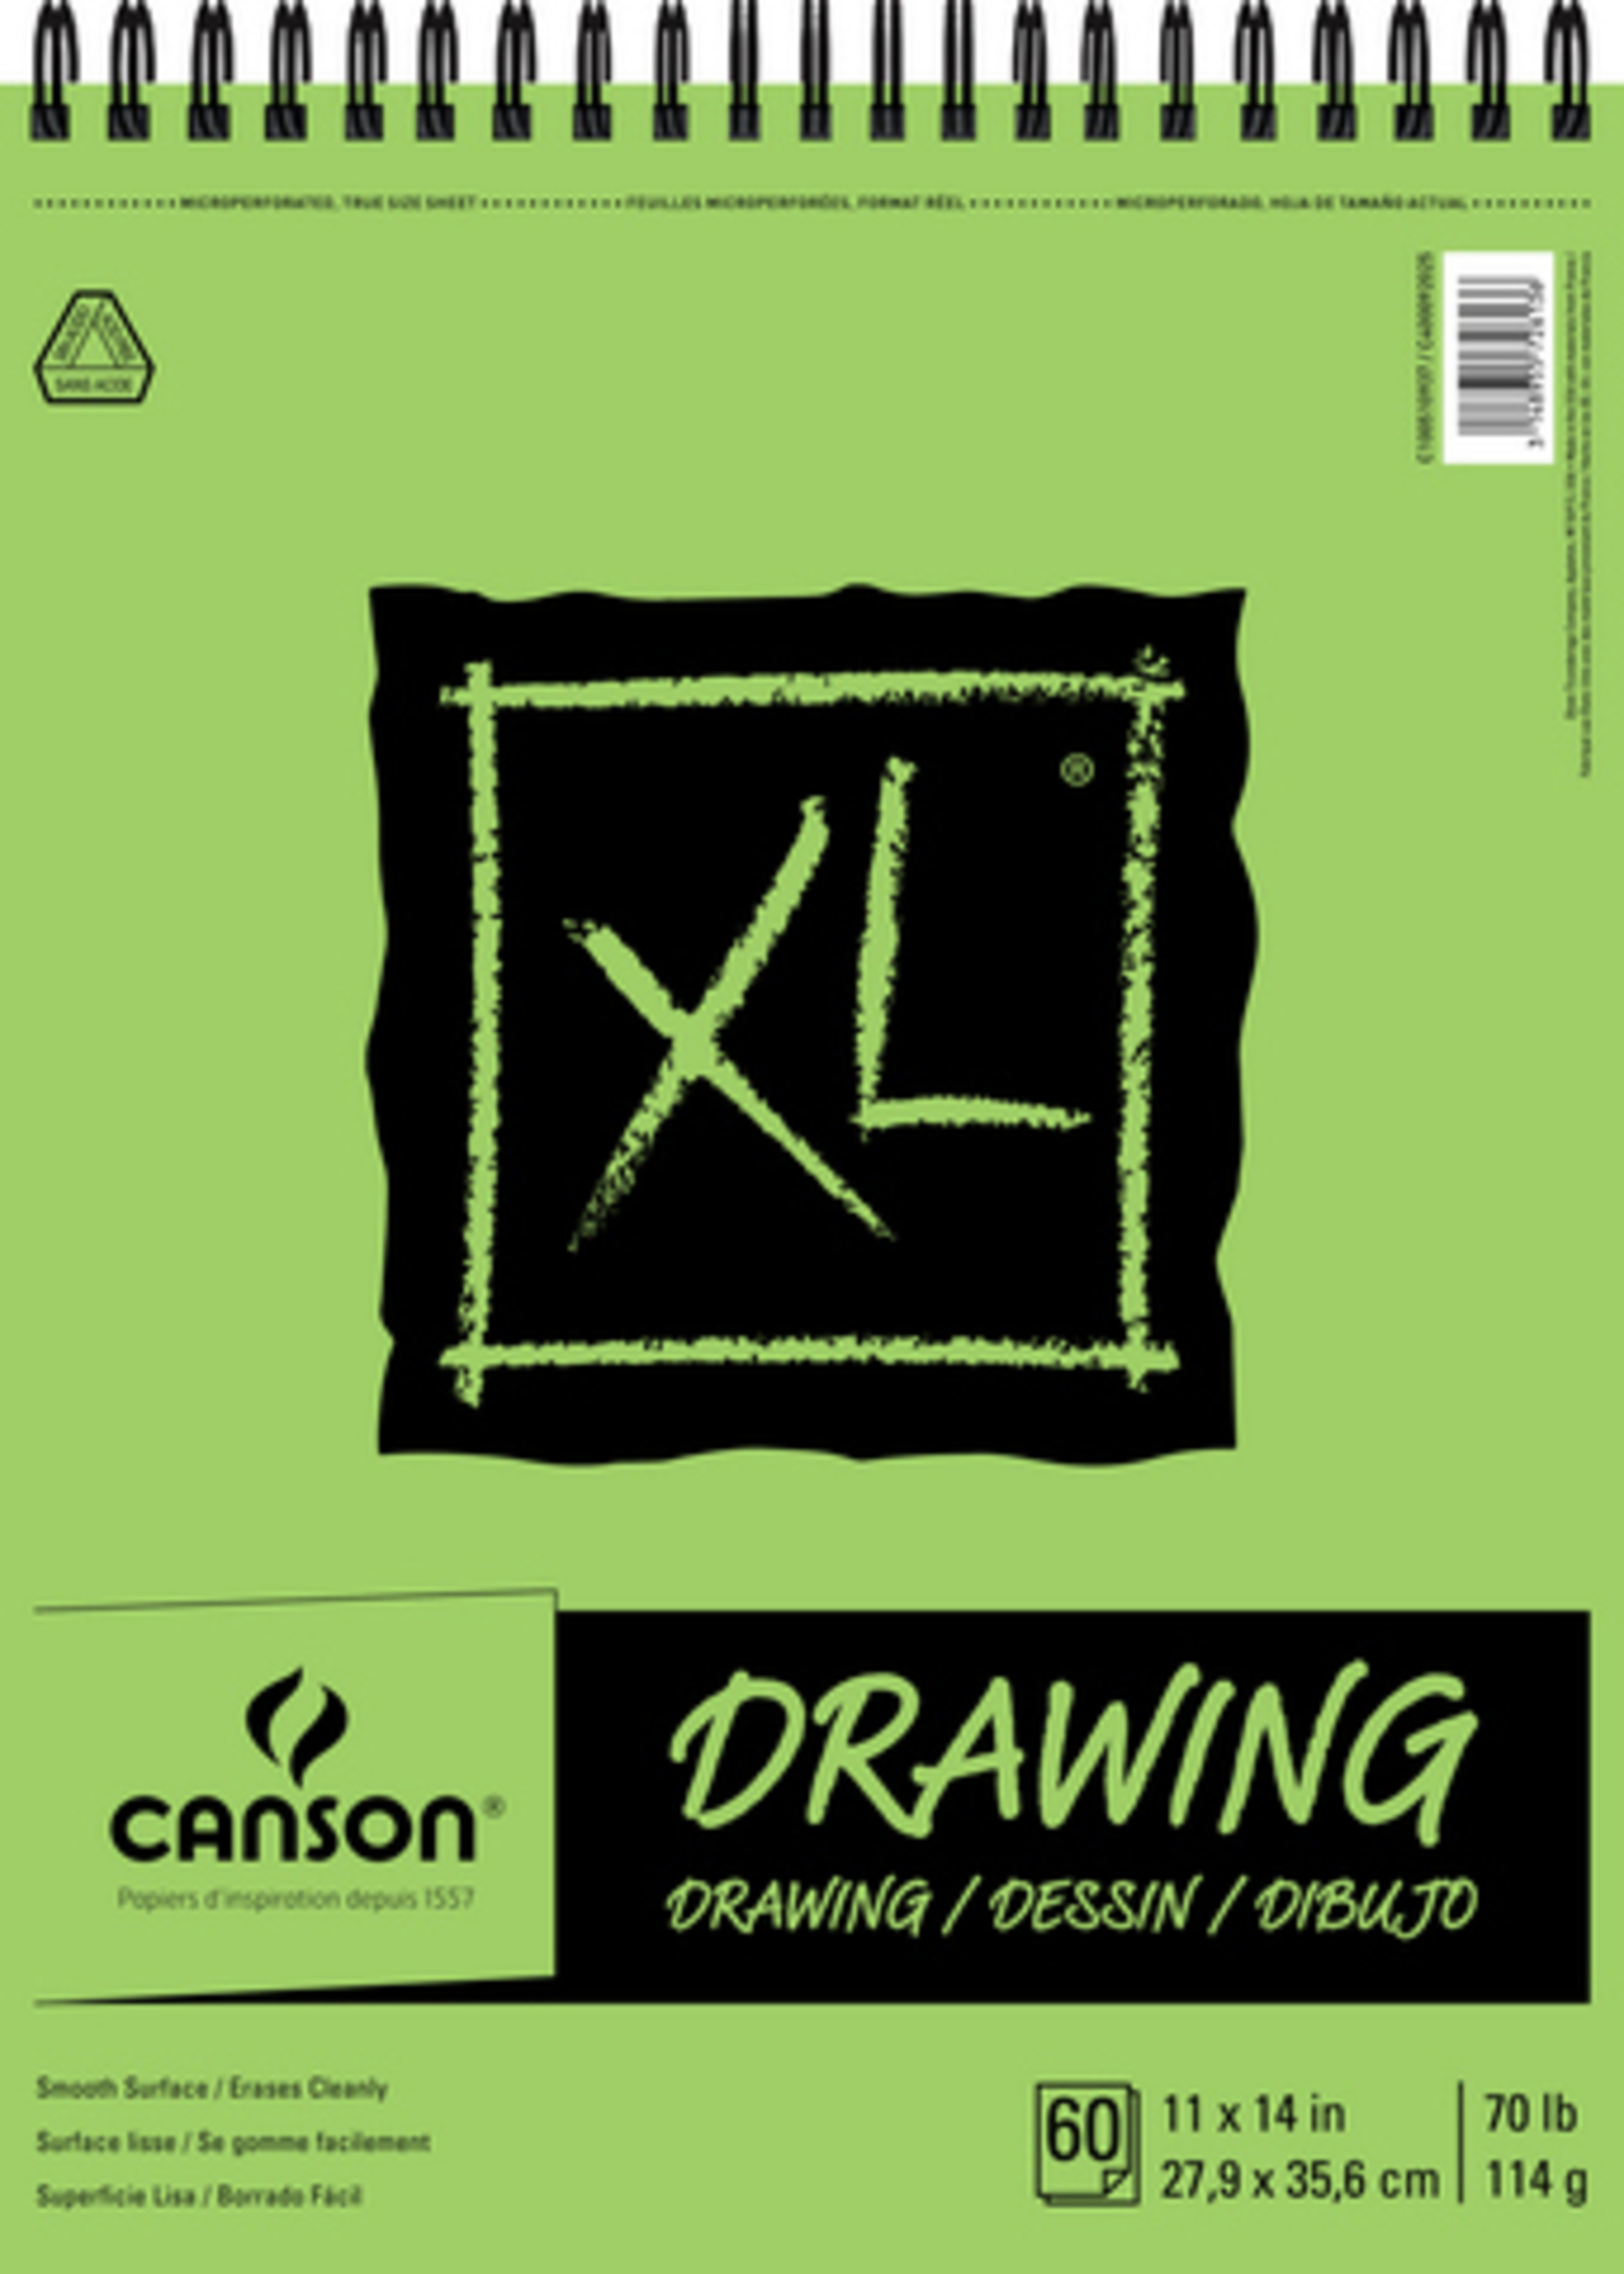 CANSON / PACON PAPERS XL DRAWING PAD